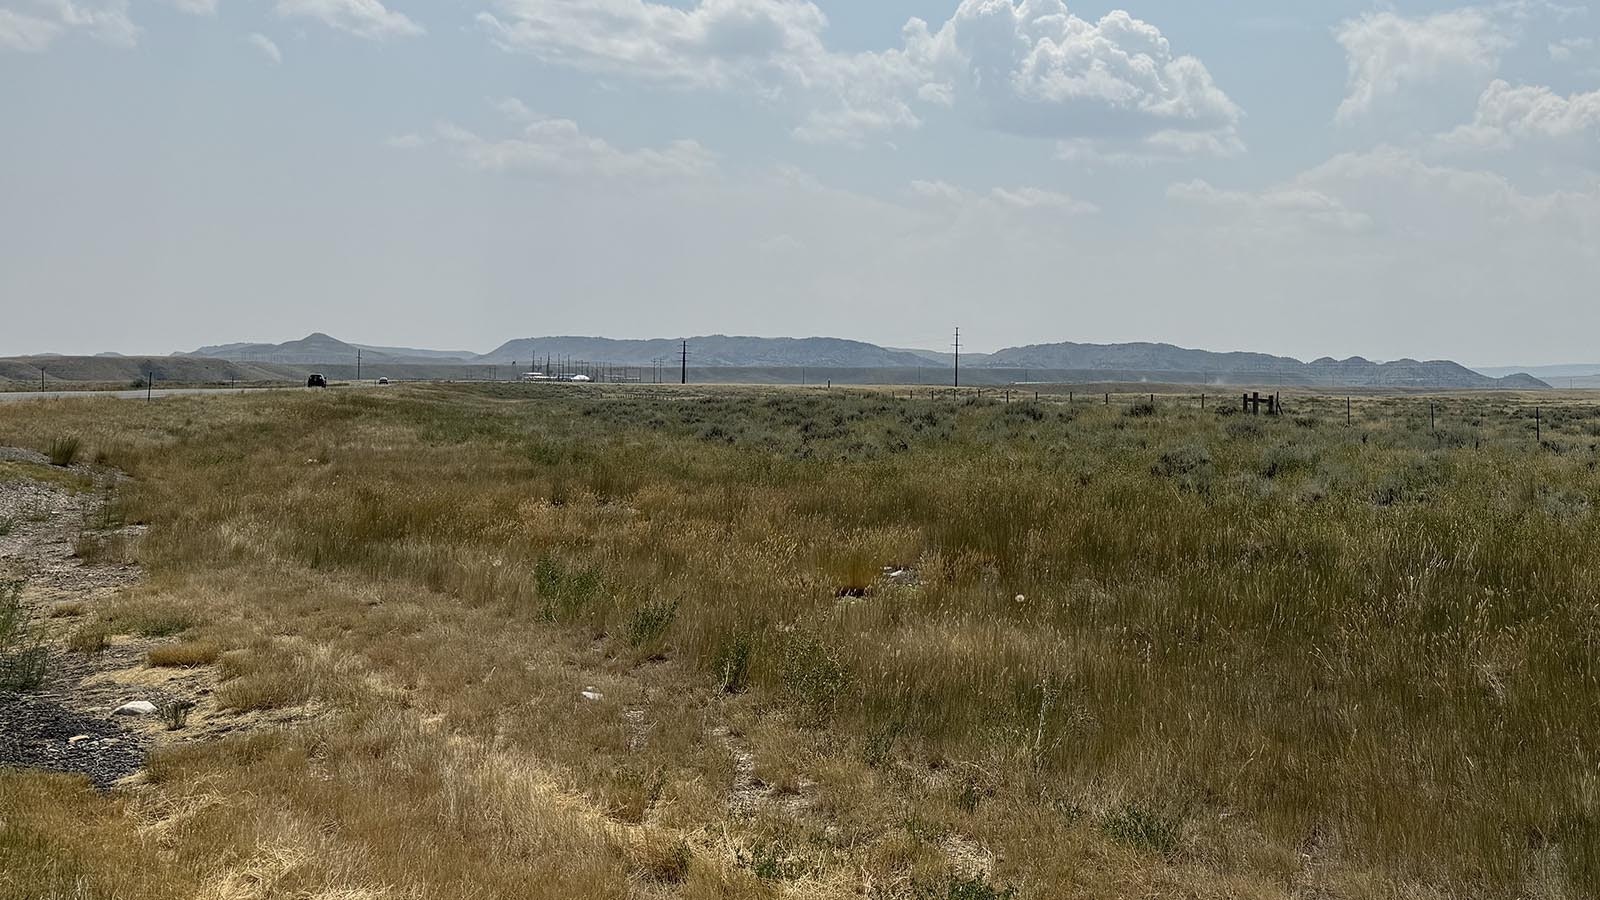 Park County has won a competive process to be home to a new $10 million Wyoming state shooting complex. It will be built on land about 7 miles south of Cody oaff Highway 120.